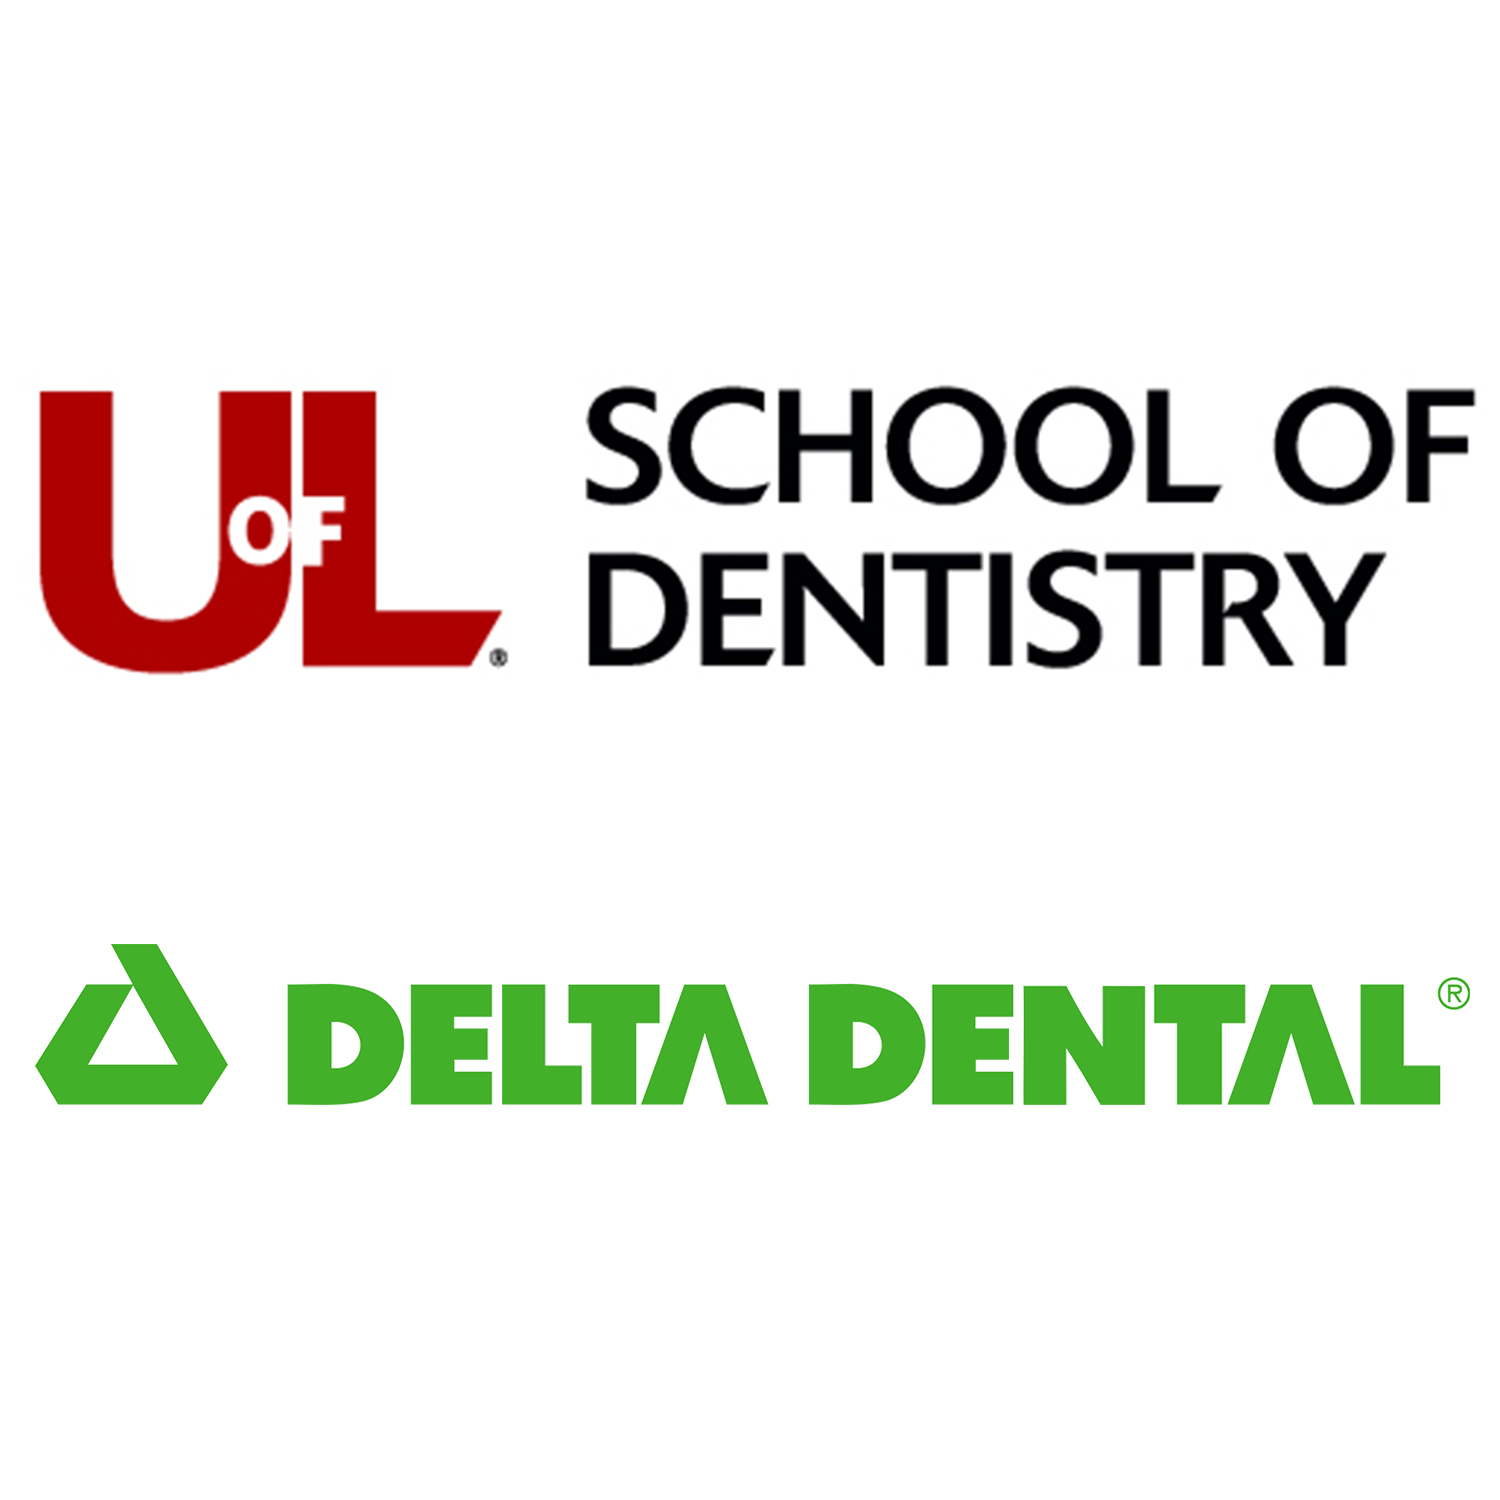 University of Louisville School of Dentistry to benefit from Delta Dental of Kentucky’s philanthropic giving